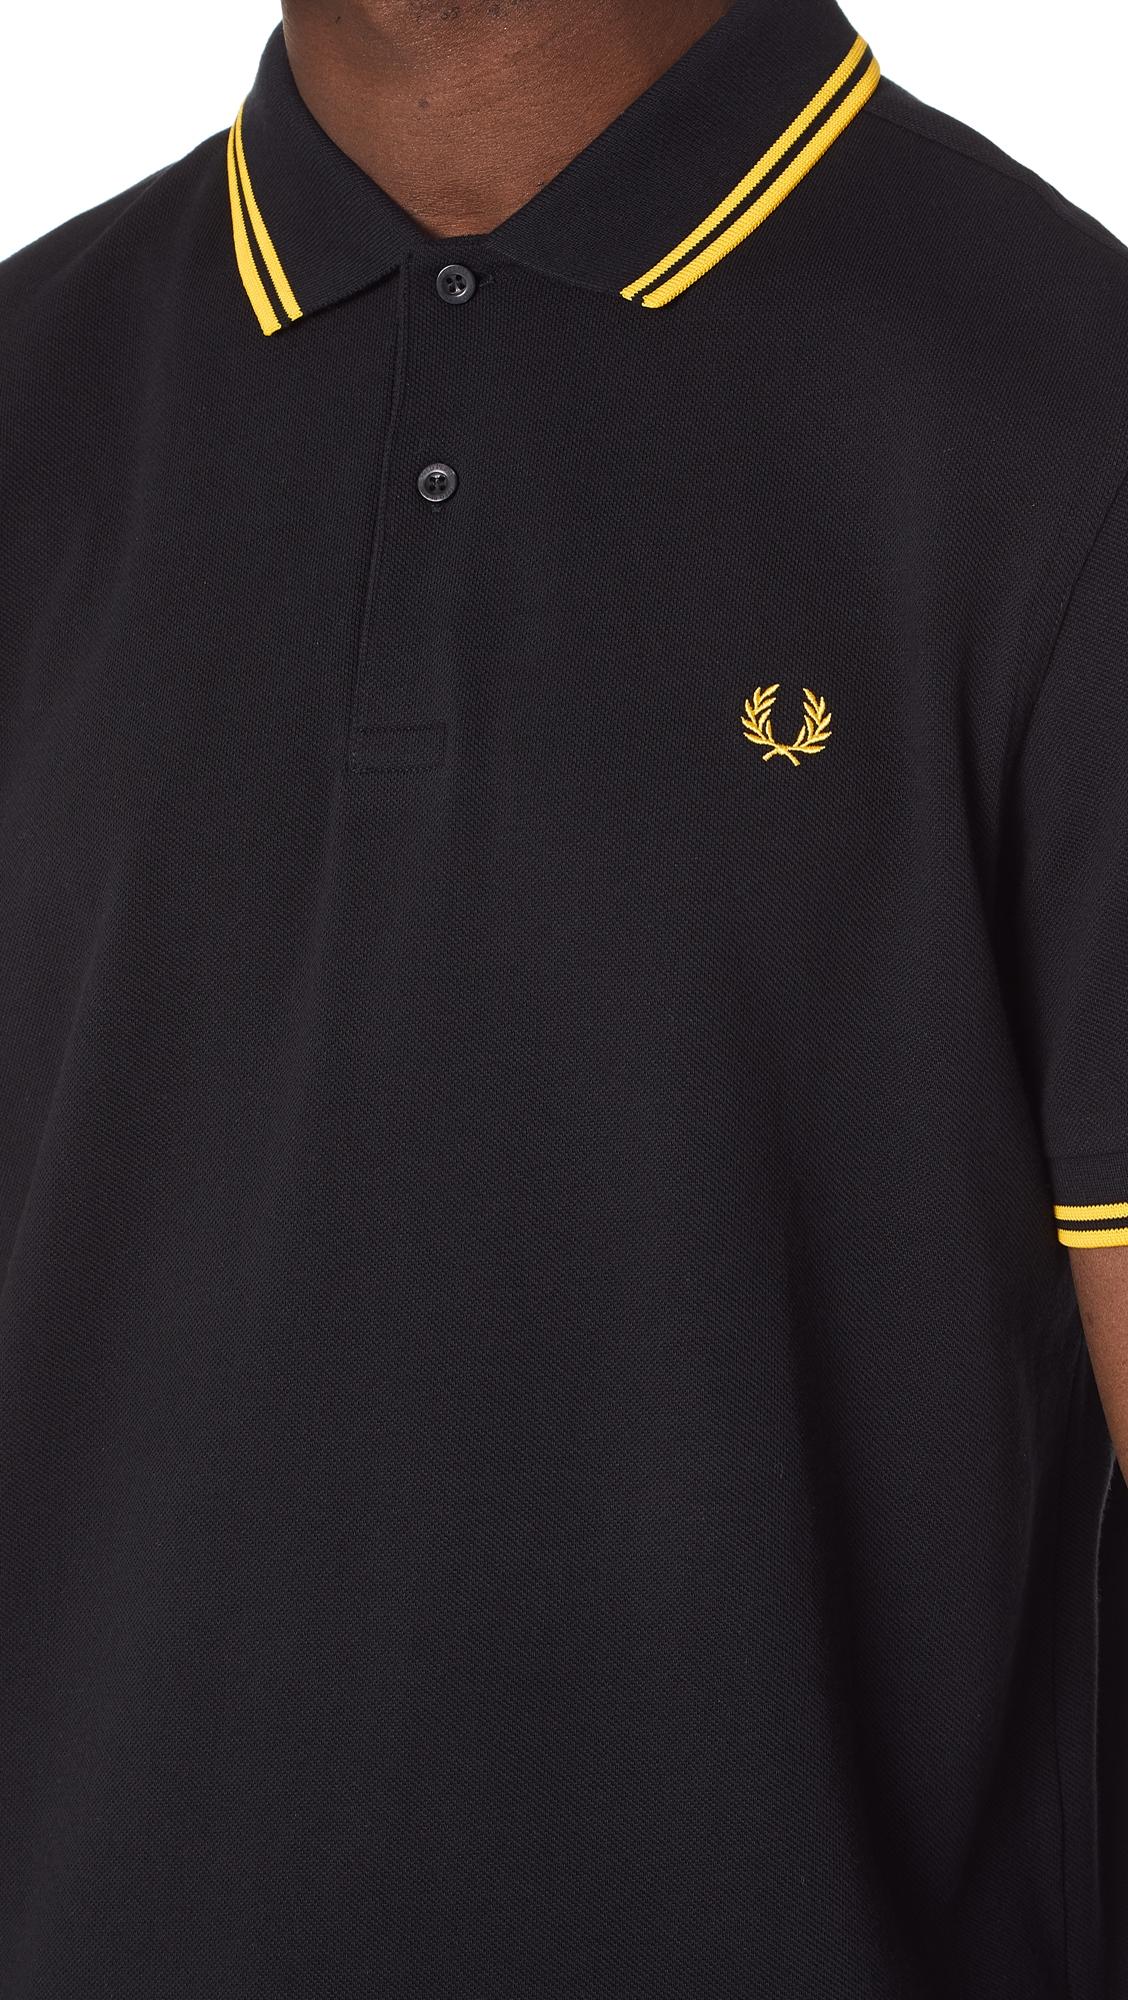 fred perry yellow and black